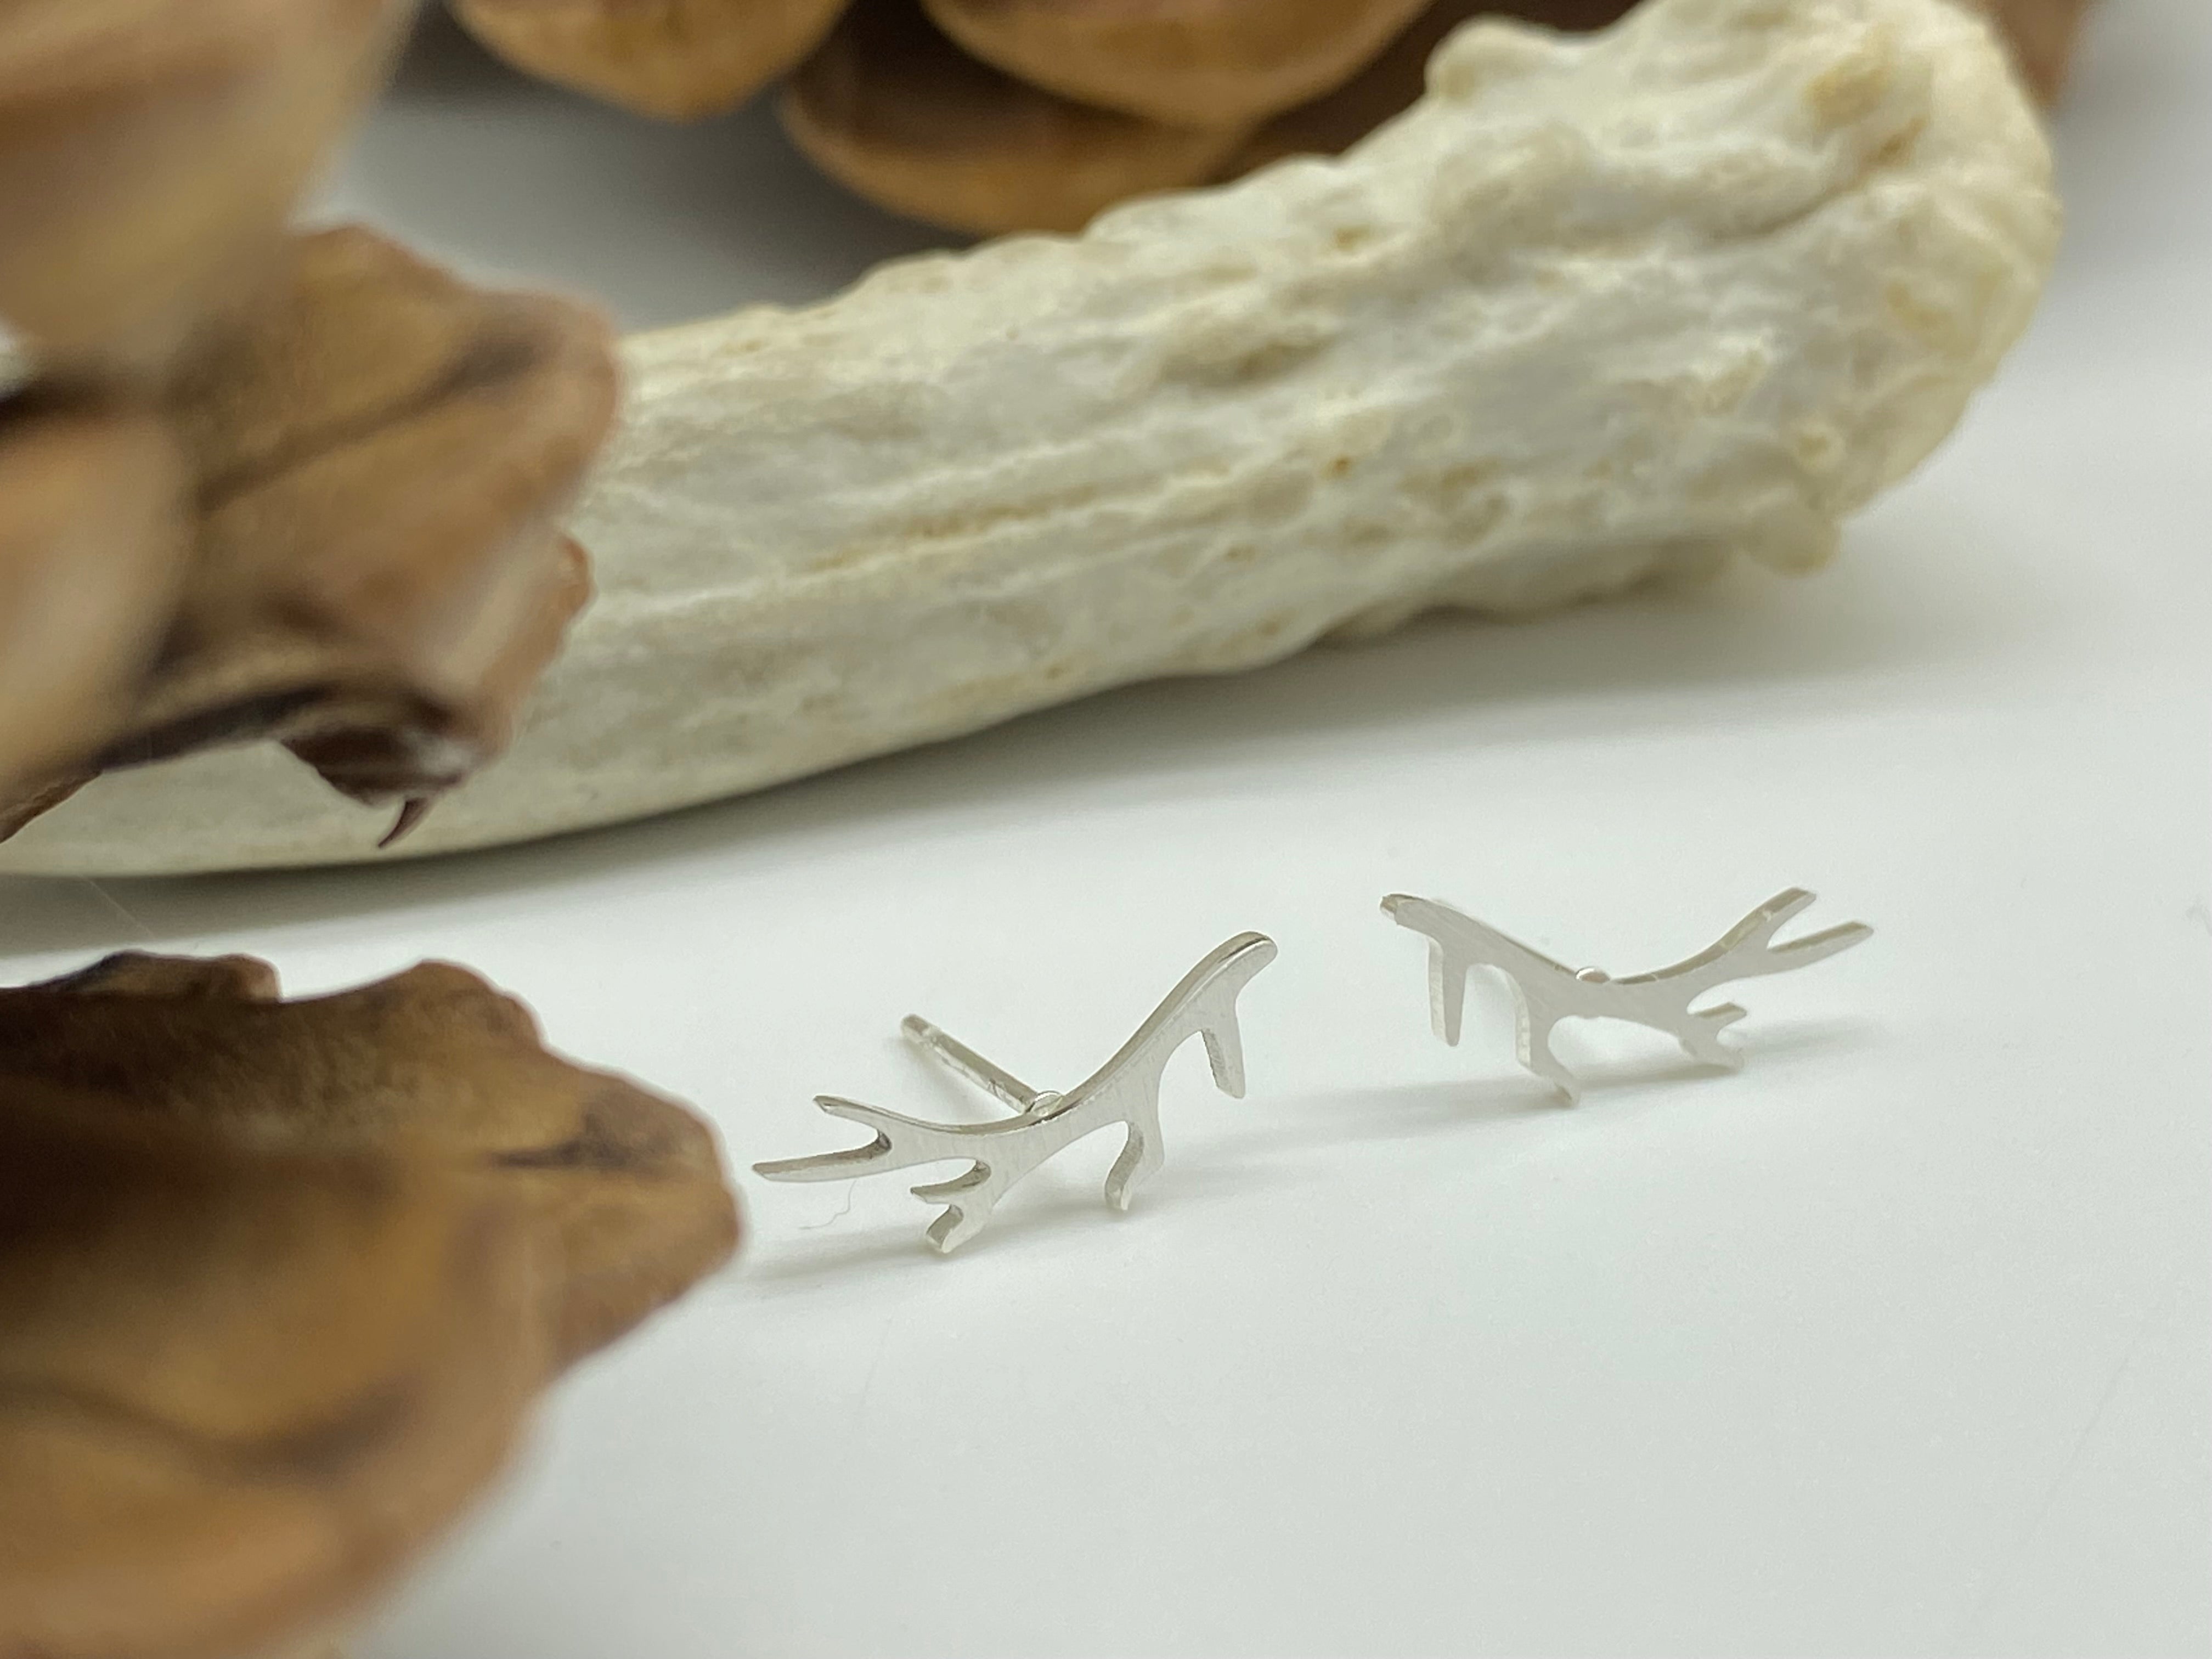 Mini antler studs in gold, silver and rose gold made from waterproof stainless steel